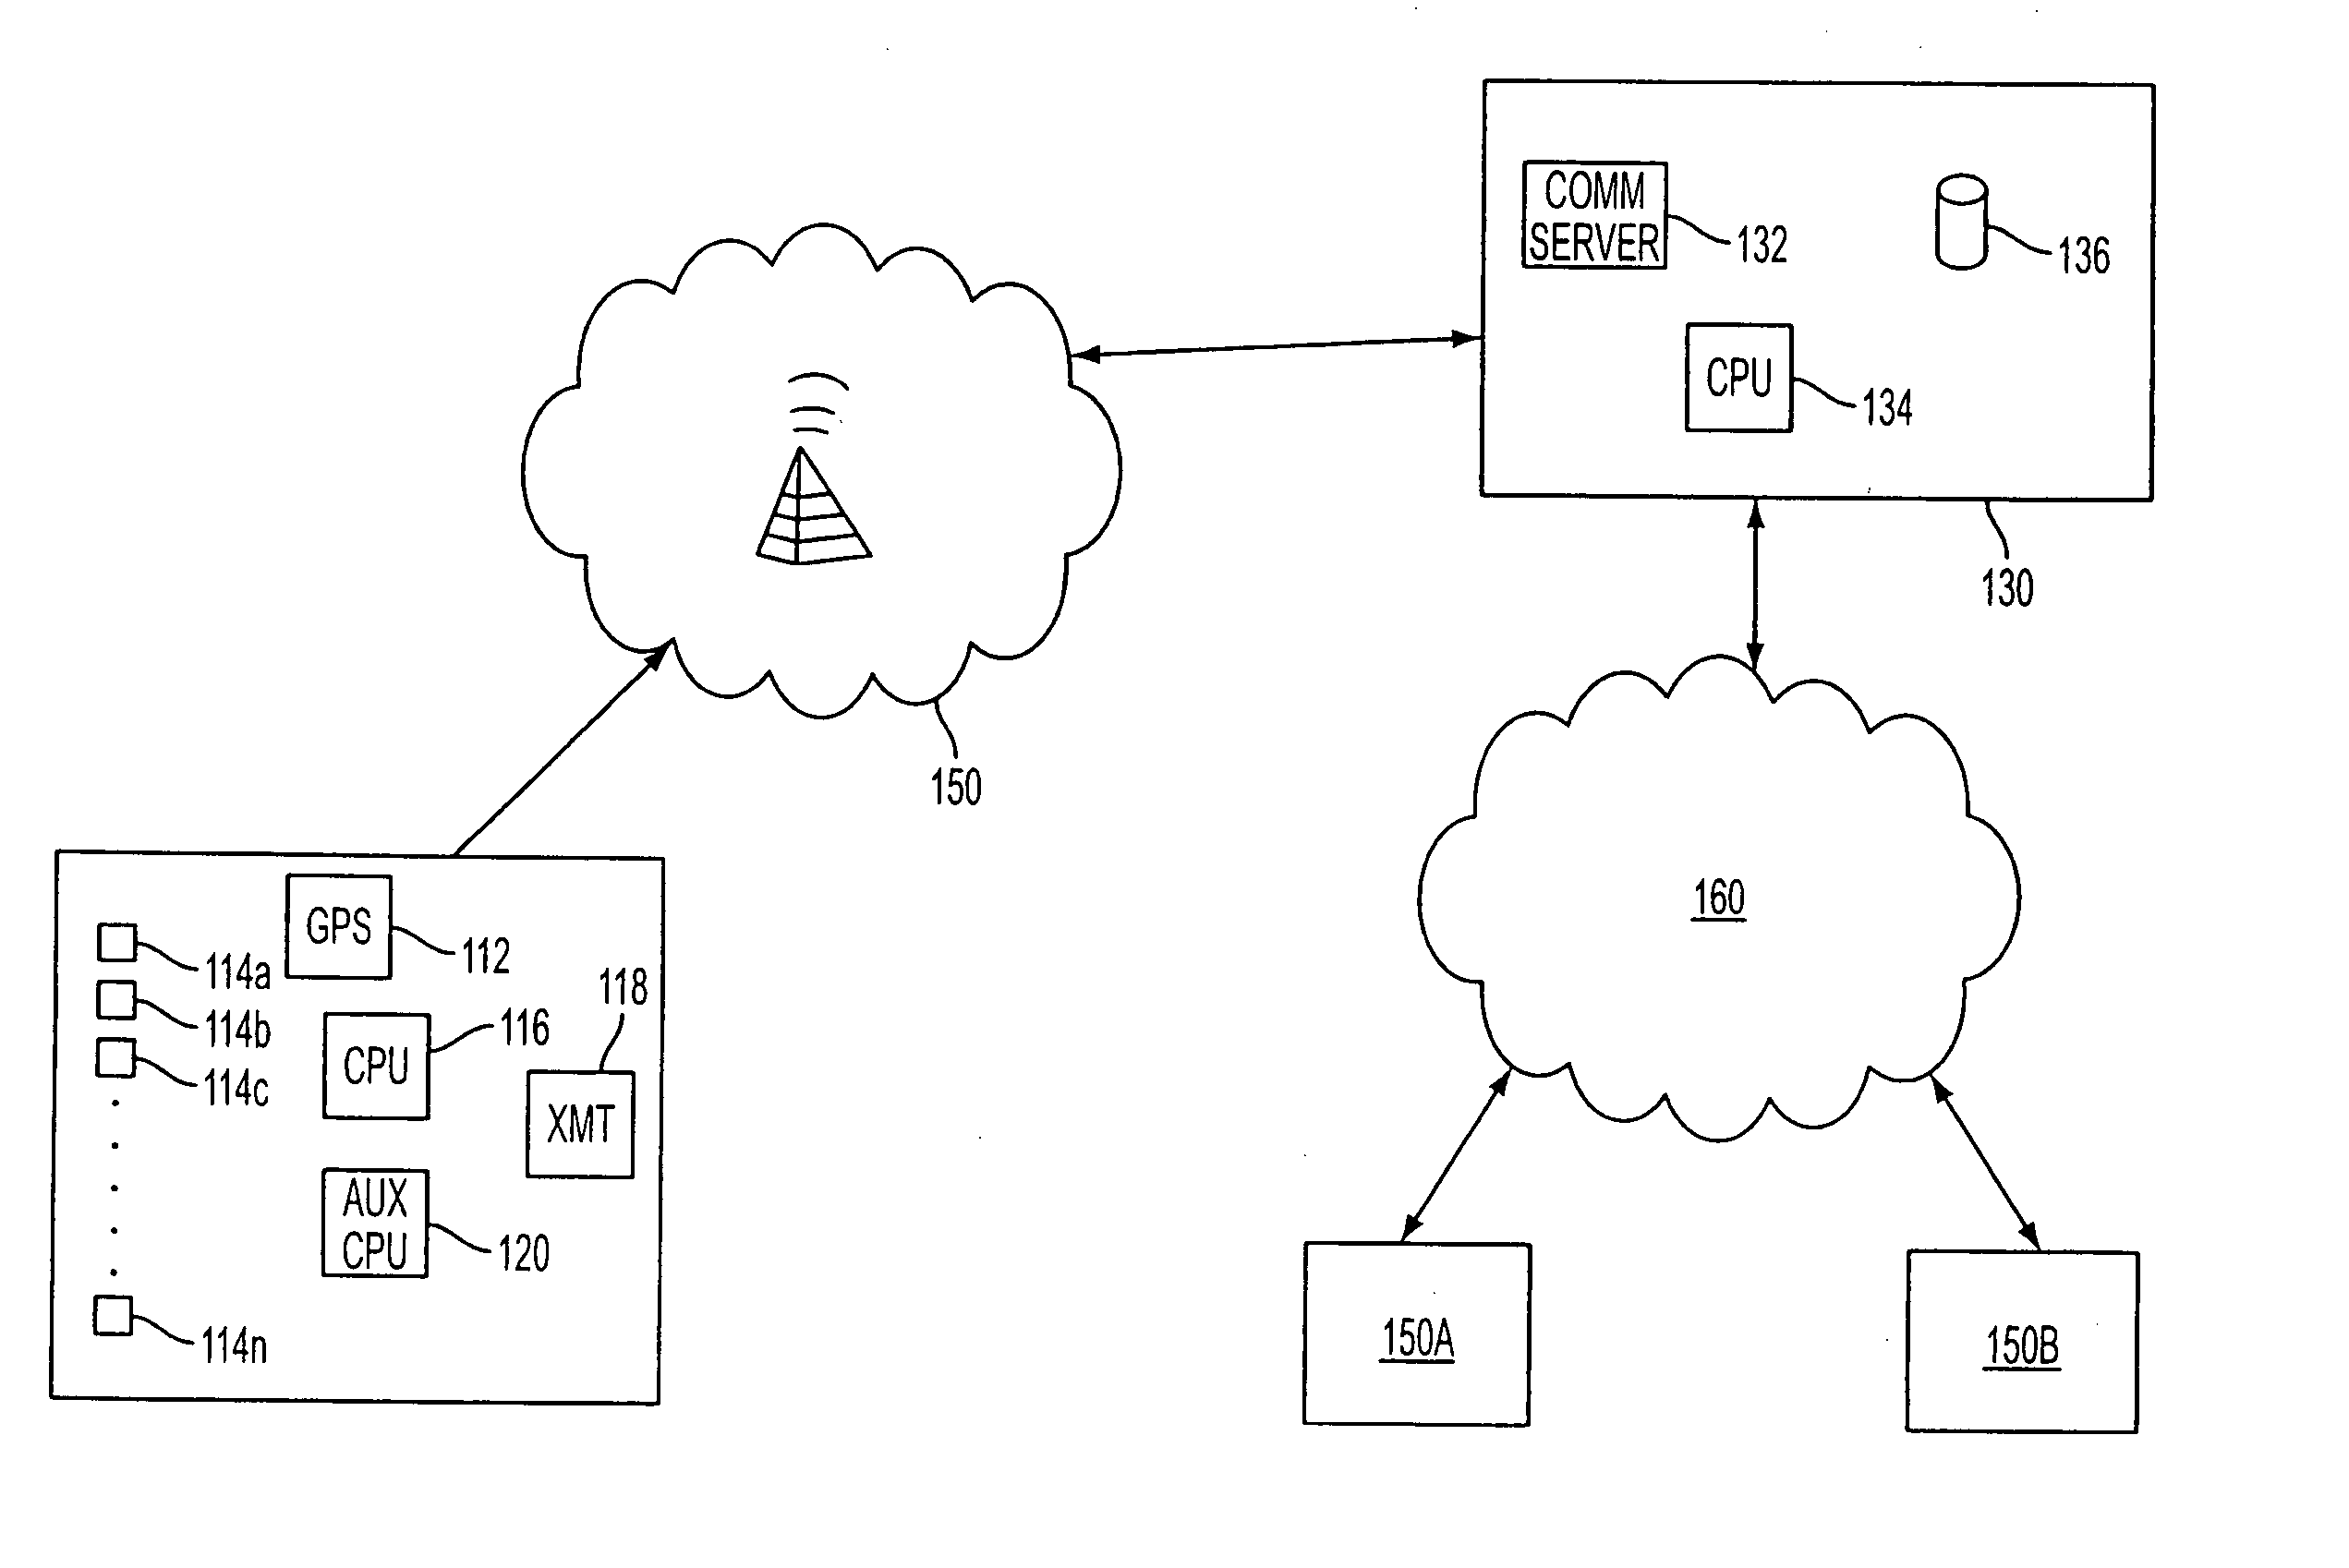 System and method for real-time management of mobile resources